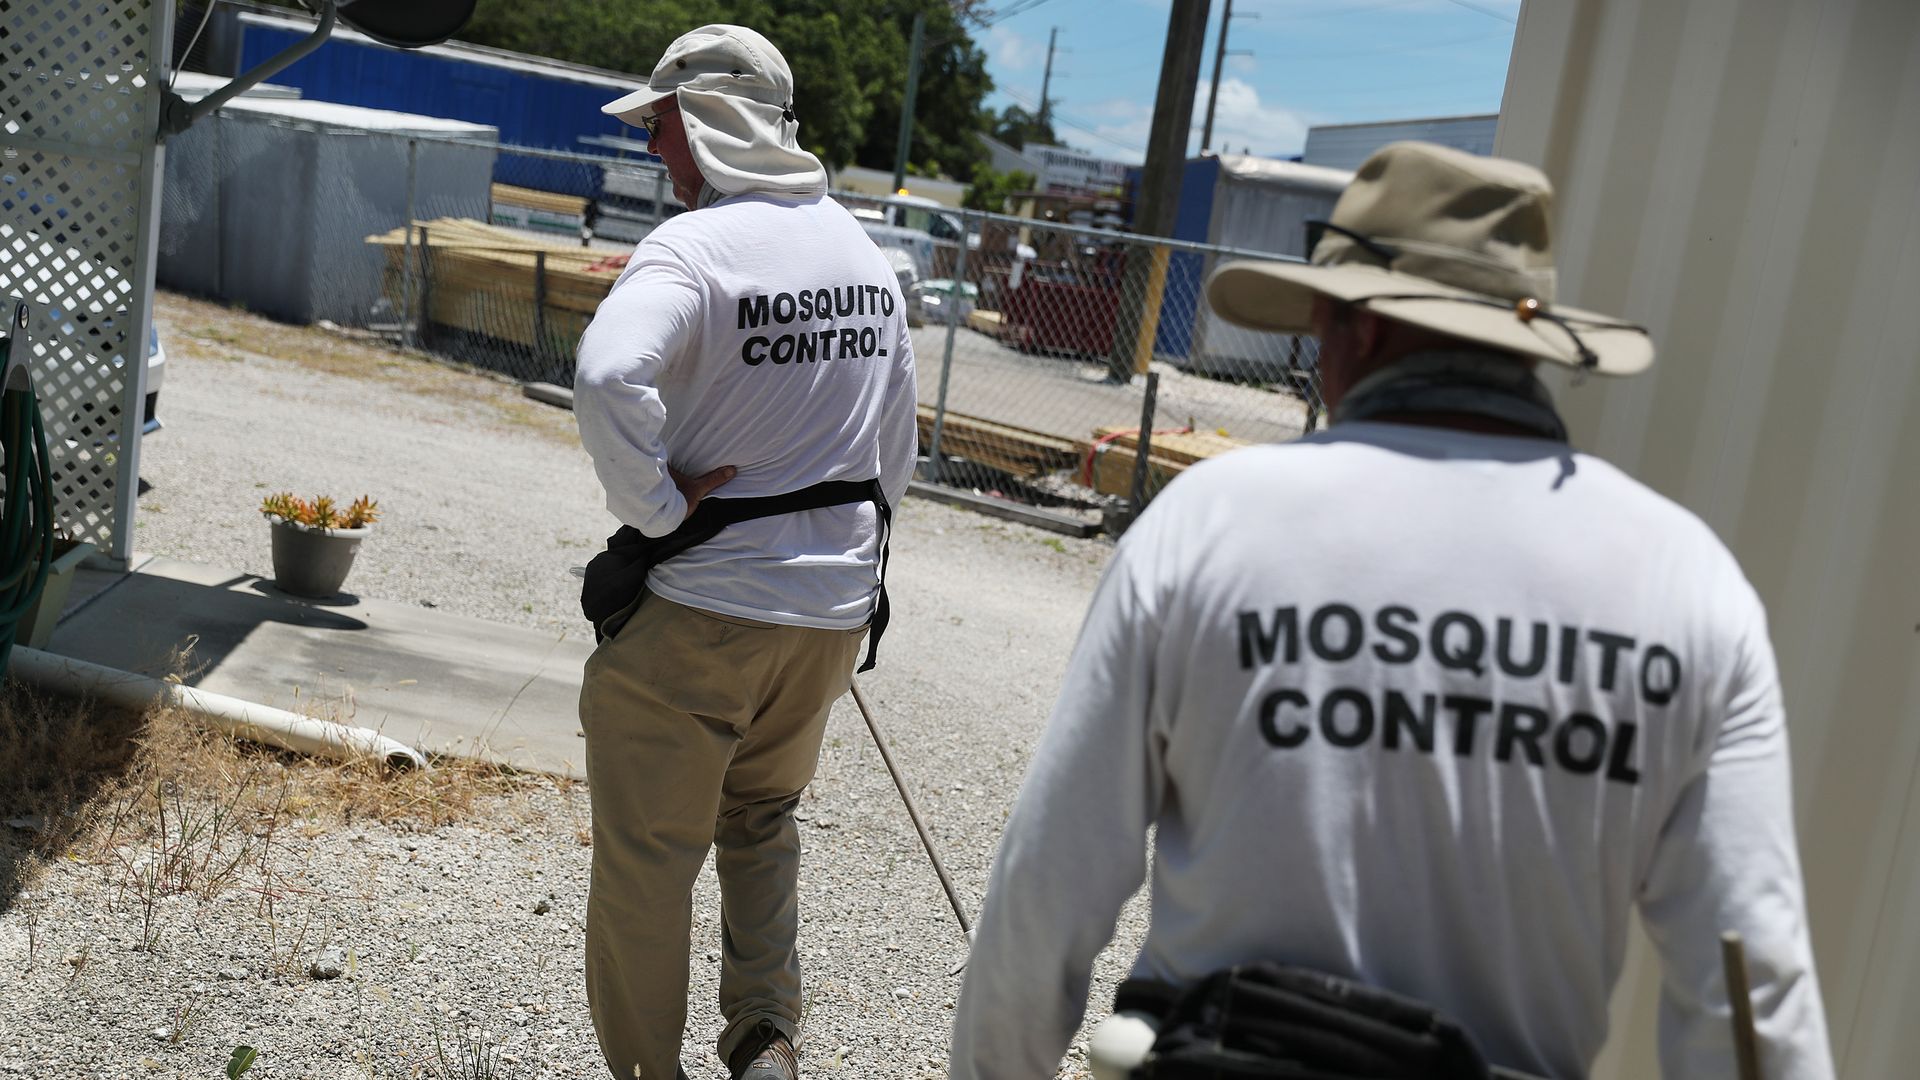 Members of the Florida Keys mosquito control department inspecting a neighborhood in Key Largo in July 2020.